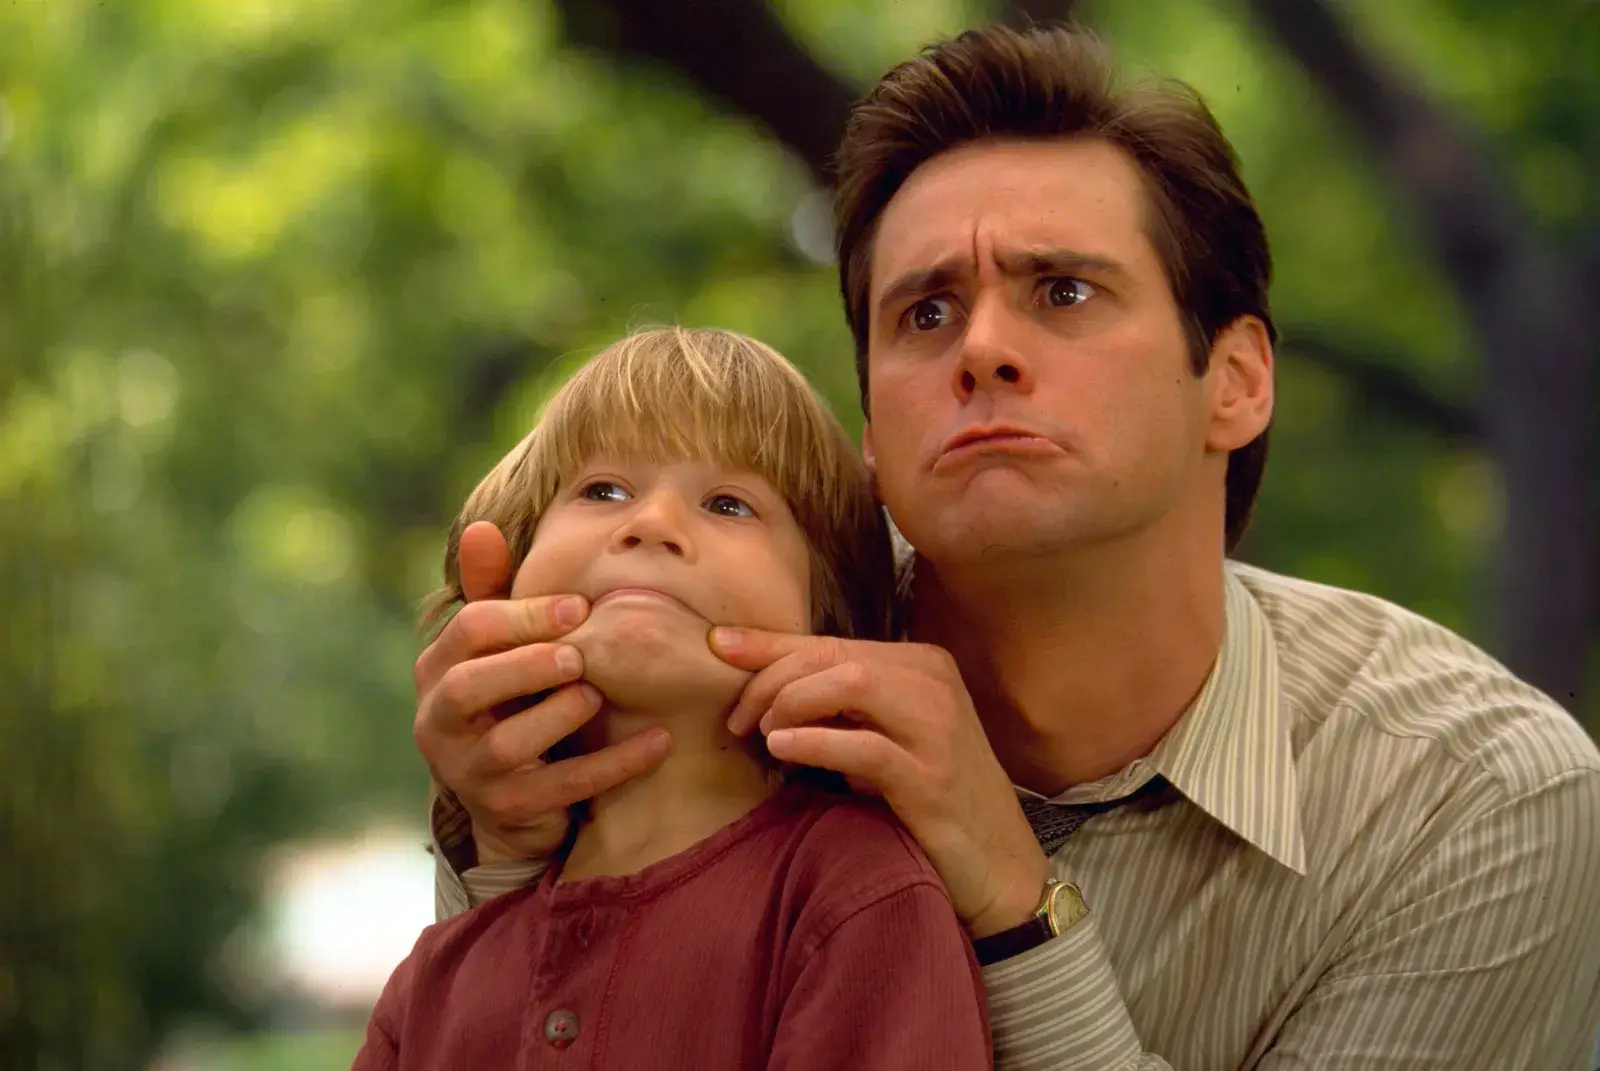 Meet Jim Carrey in You: The Funny, Kind and Talented You